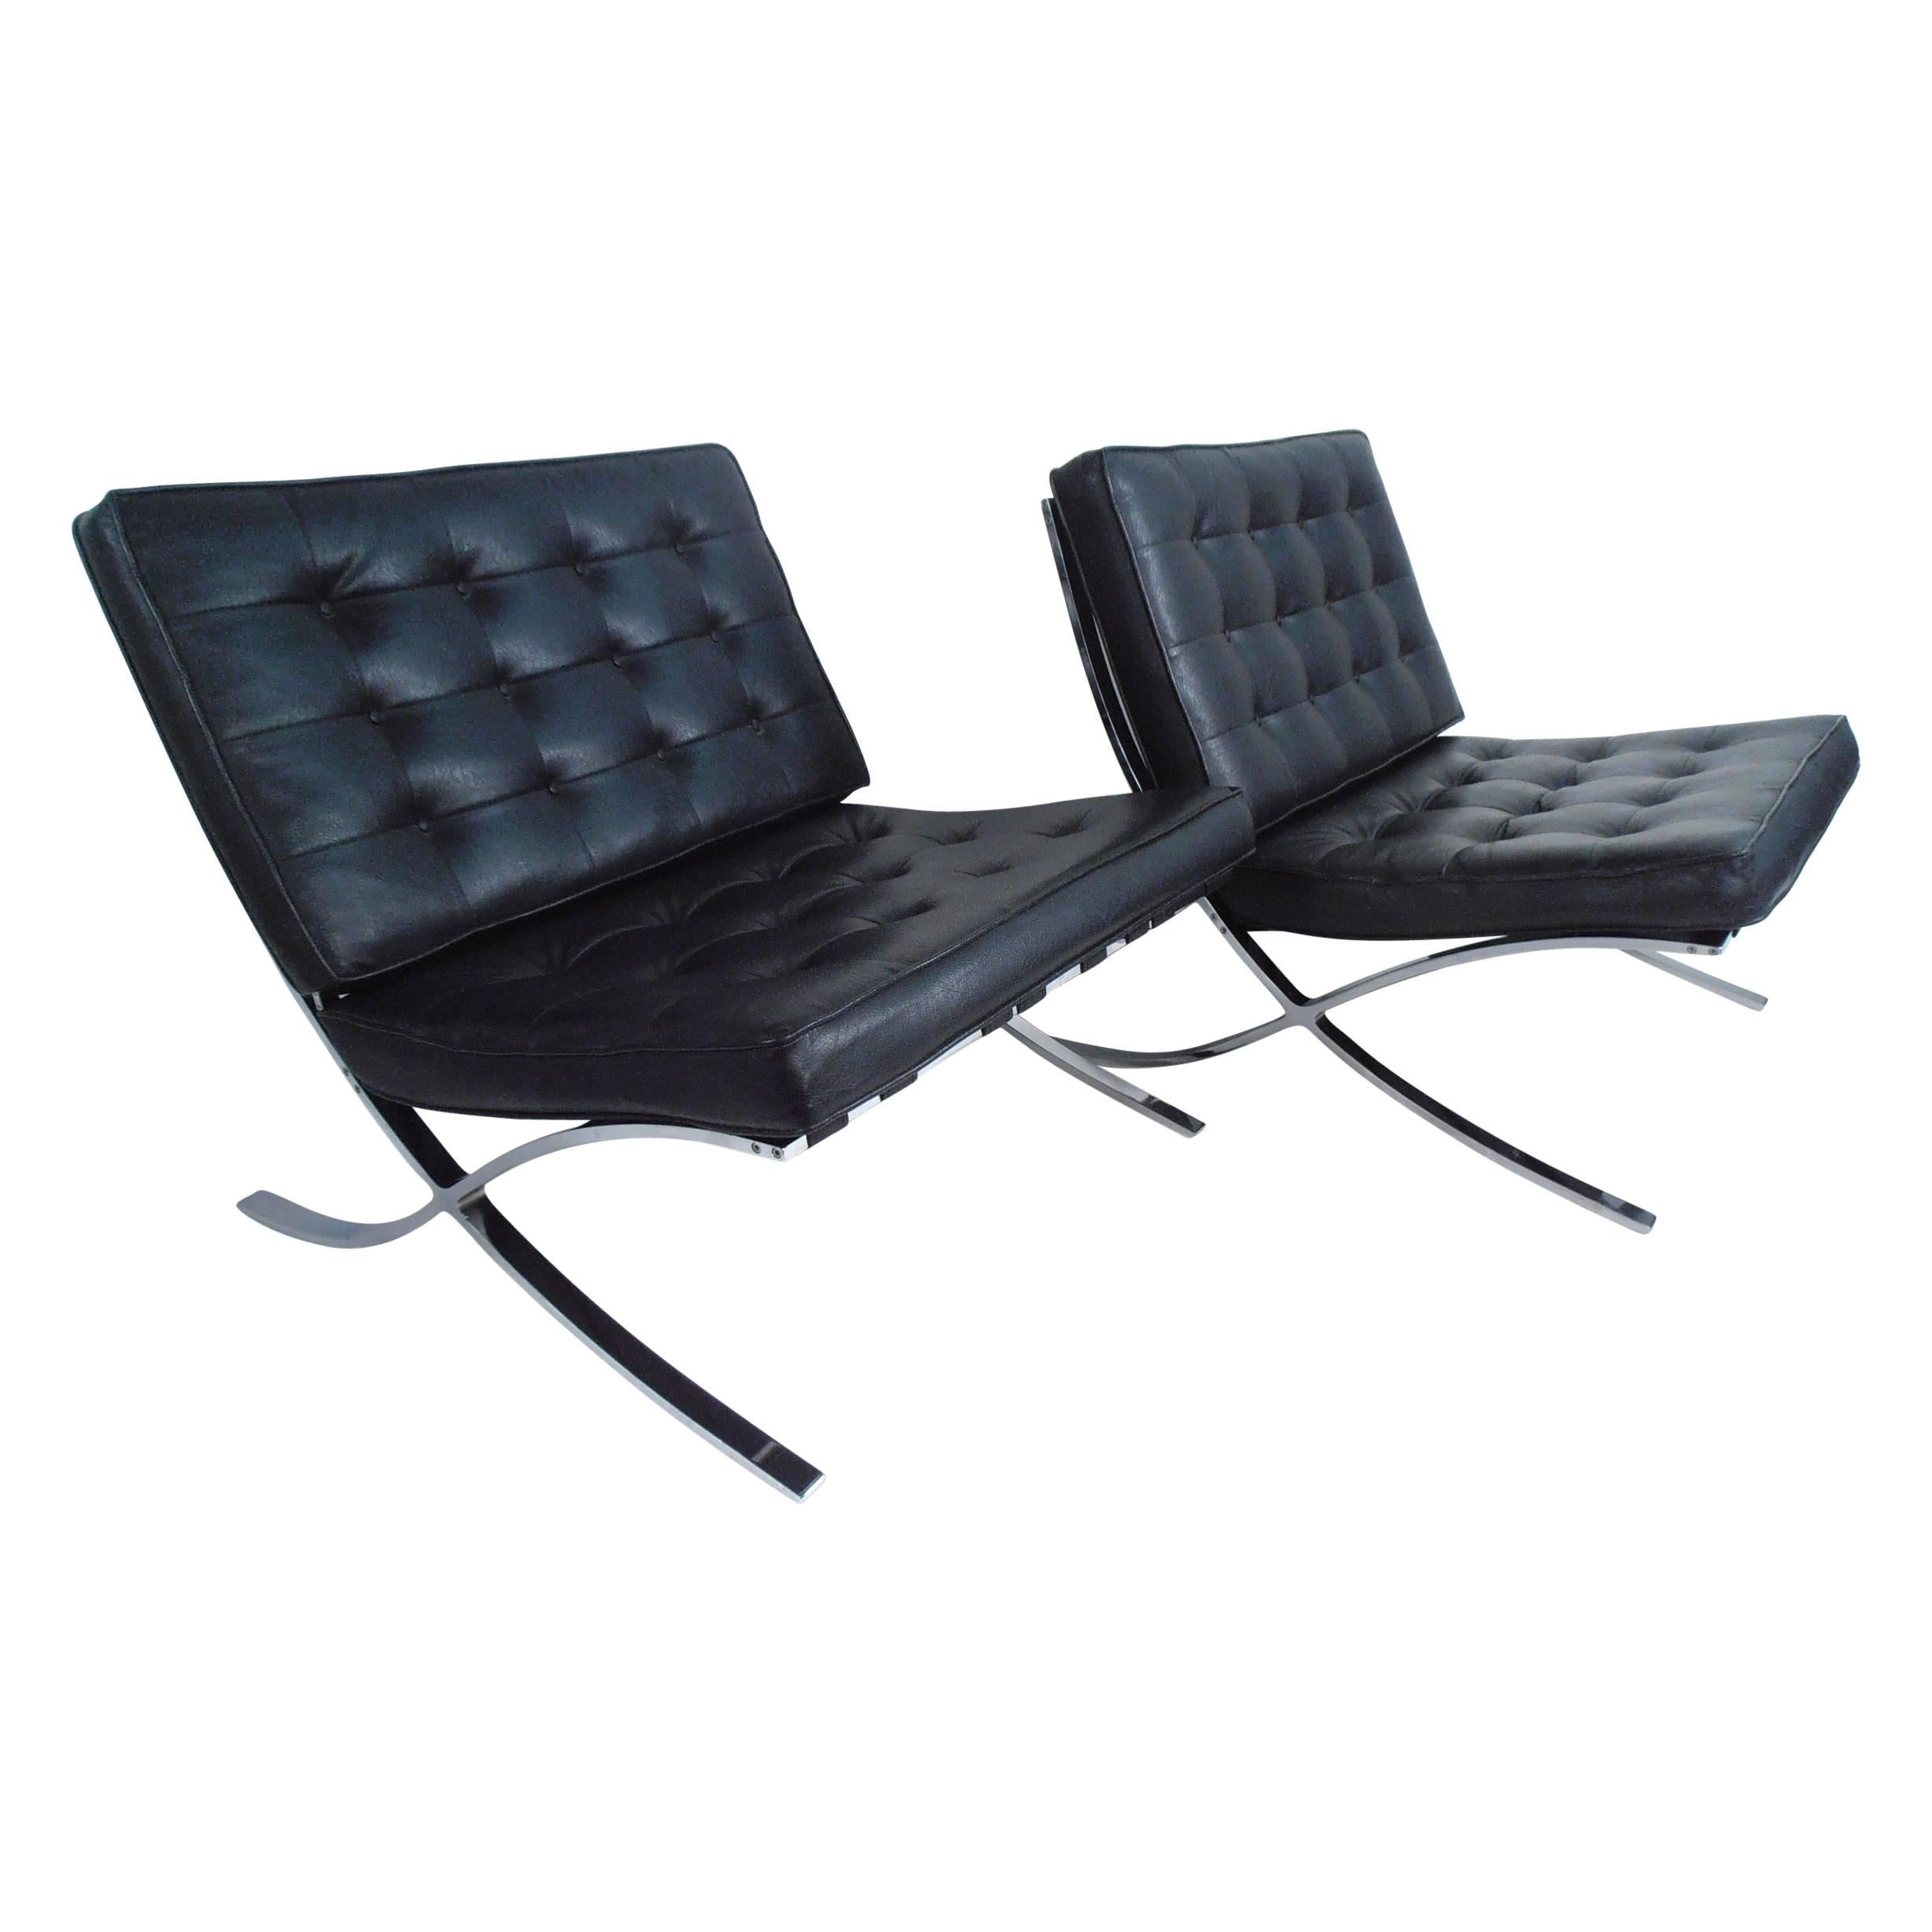 Contemporary Modern Barcelona Chairs in the Style of Mies van der Rohe